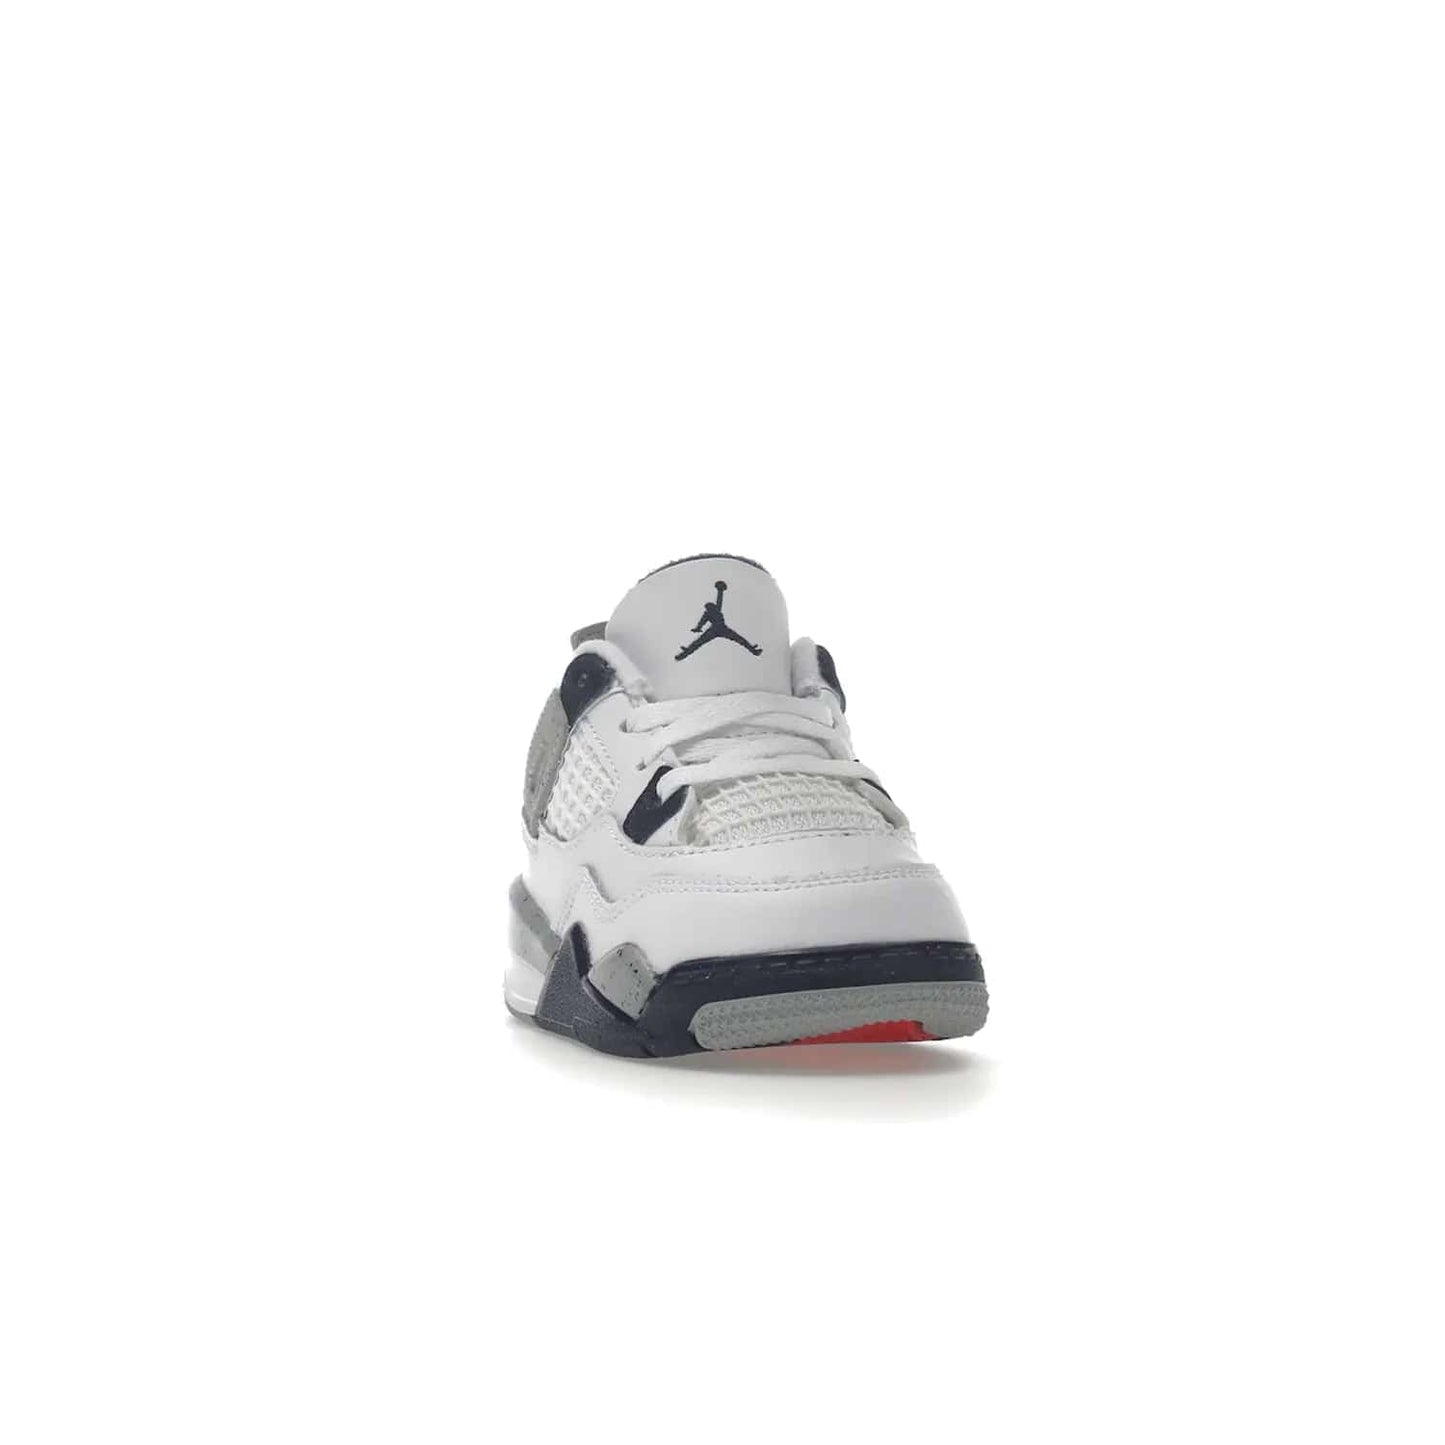 Jordan 4 Retro Midnight Navy (TD) - Image 8 - Only at www.BallersClubKickz.com - Introducing the Jordan 4 Retro Midnight Navy (TD) for kids. White leather upper with navy and grey accents plus fire red detailing. Perfect for everyday wear. Get yours before they sell out.